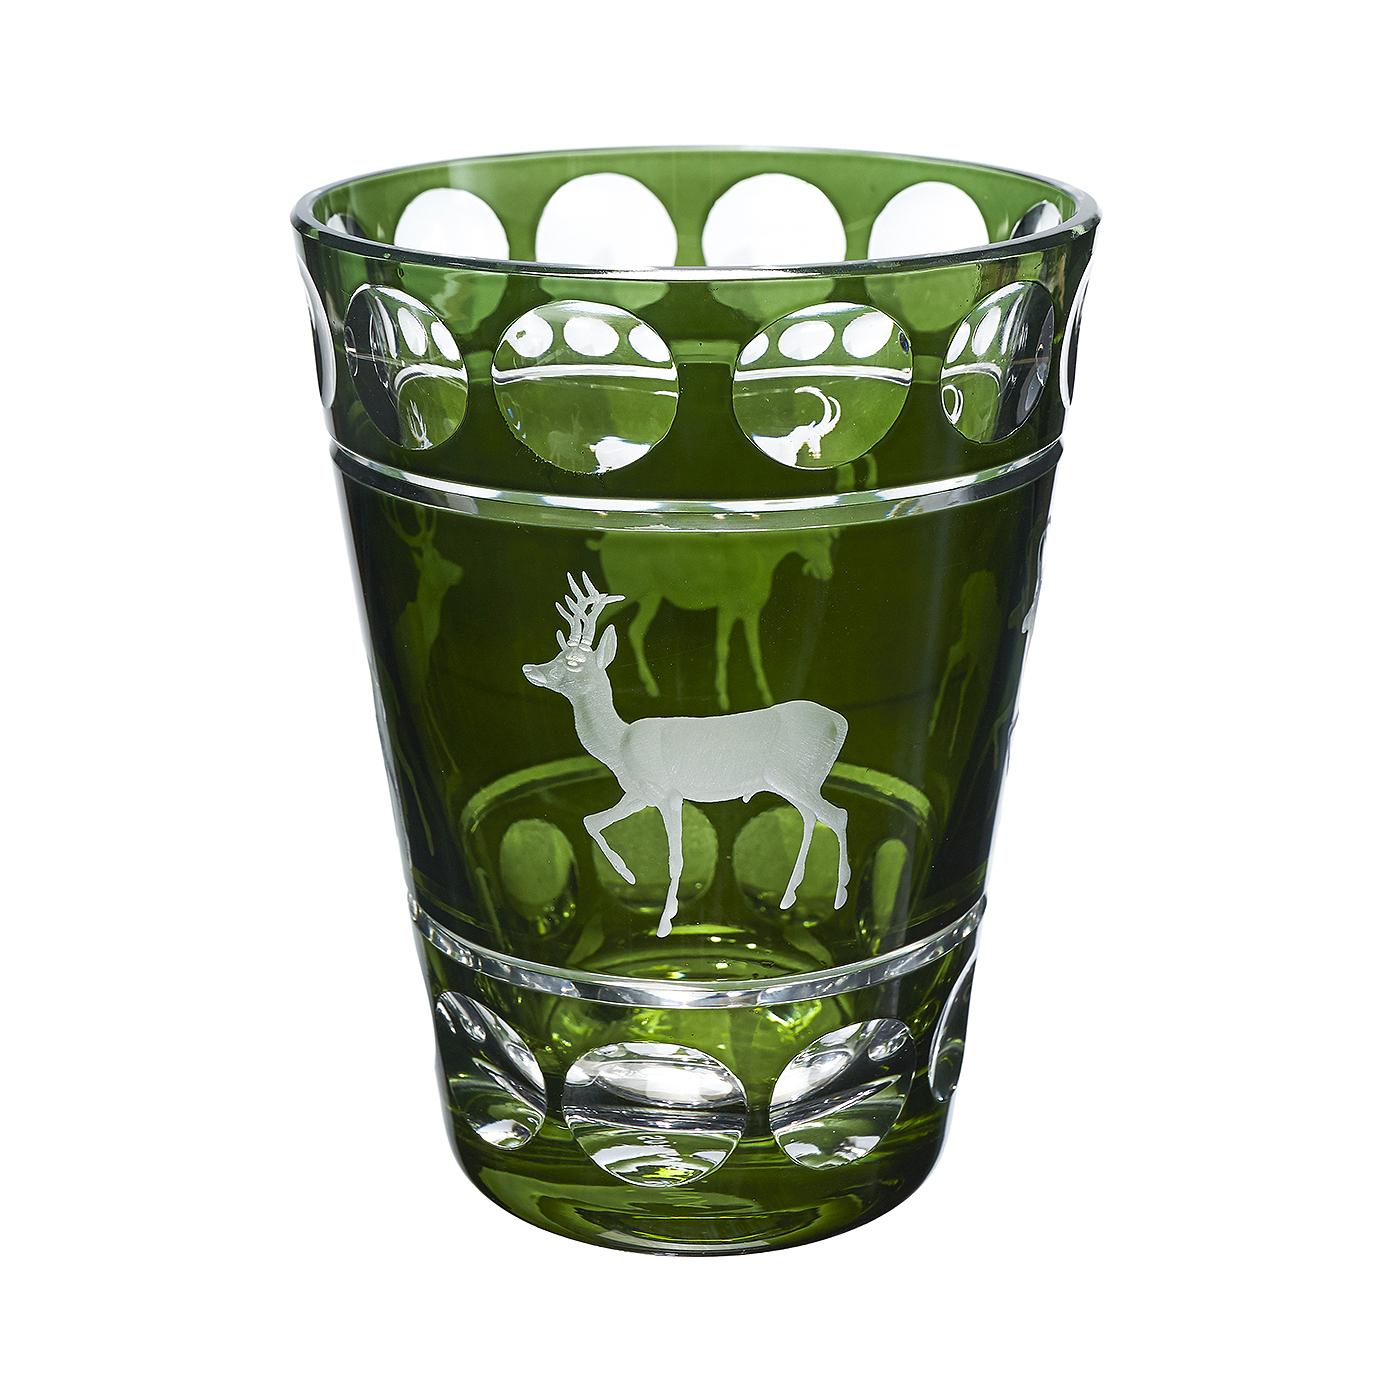 hand blown crystal vase in green glass with a hunting scene. The decor is a hunting decor with 4 hands-free engraved animals in natrualistic style. Completely hand blown and hand-engraved in Bavaria/Germany. The glass here shown comes in dark green